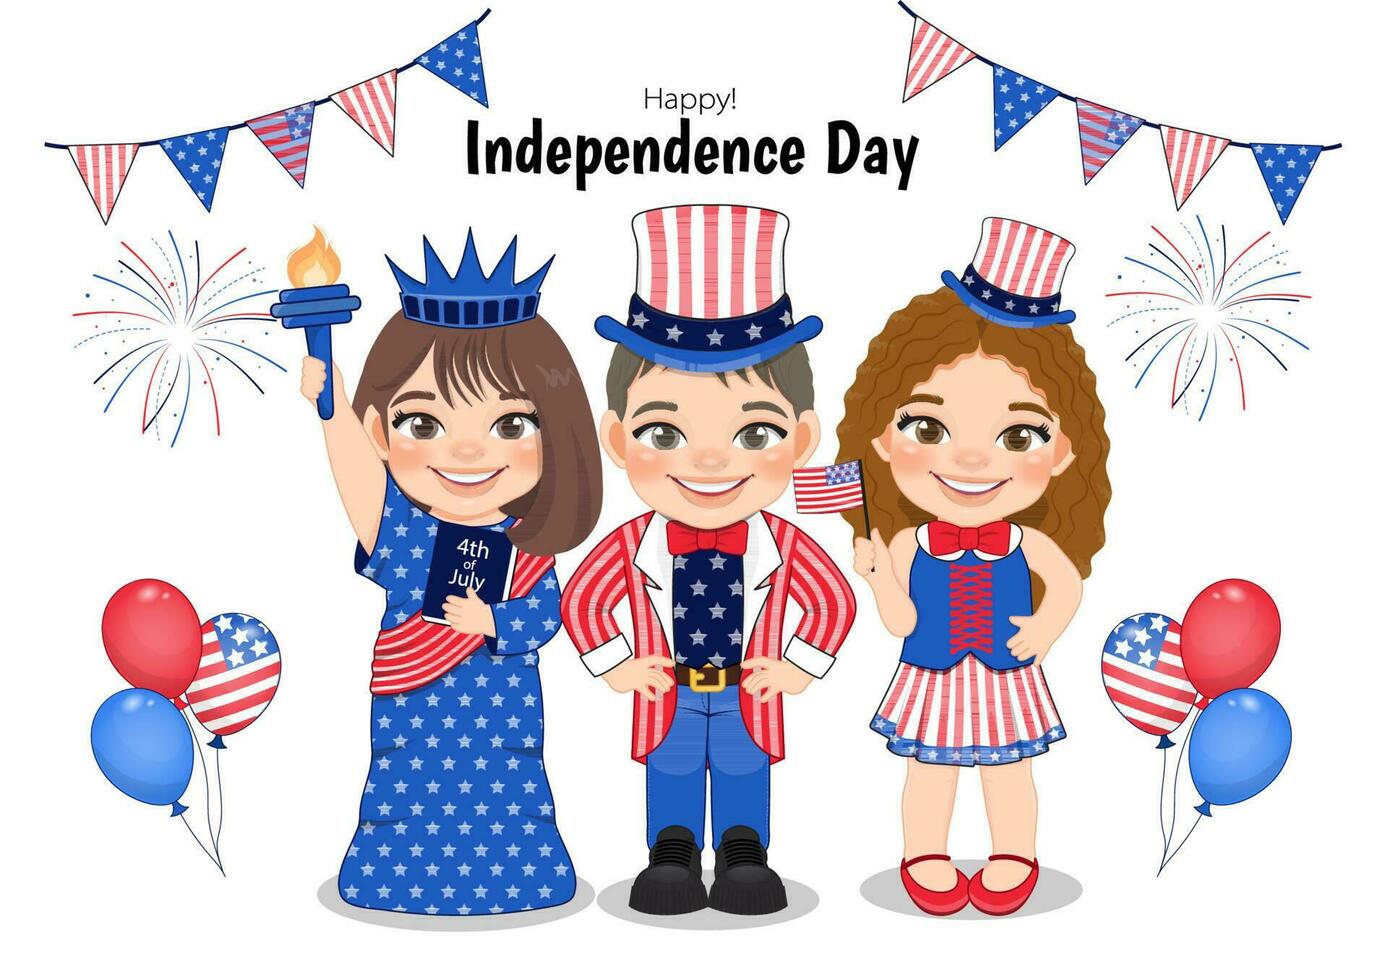 American Children Portrait Celebrating 4th Of July Independence Day with Costume, Holding Flags, Wearing Uncle Sam Hat, Statue of Liberty Vector